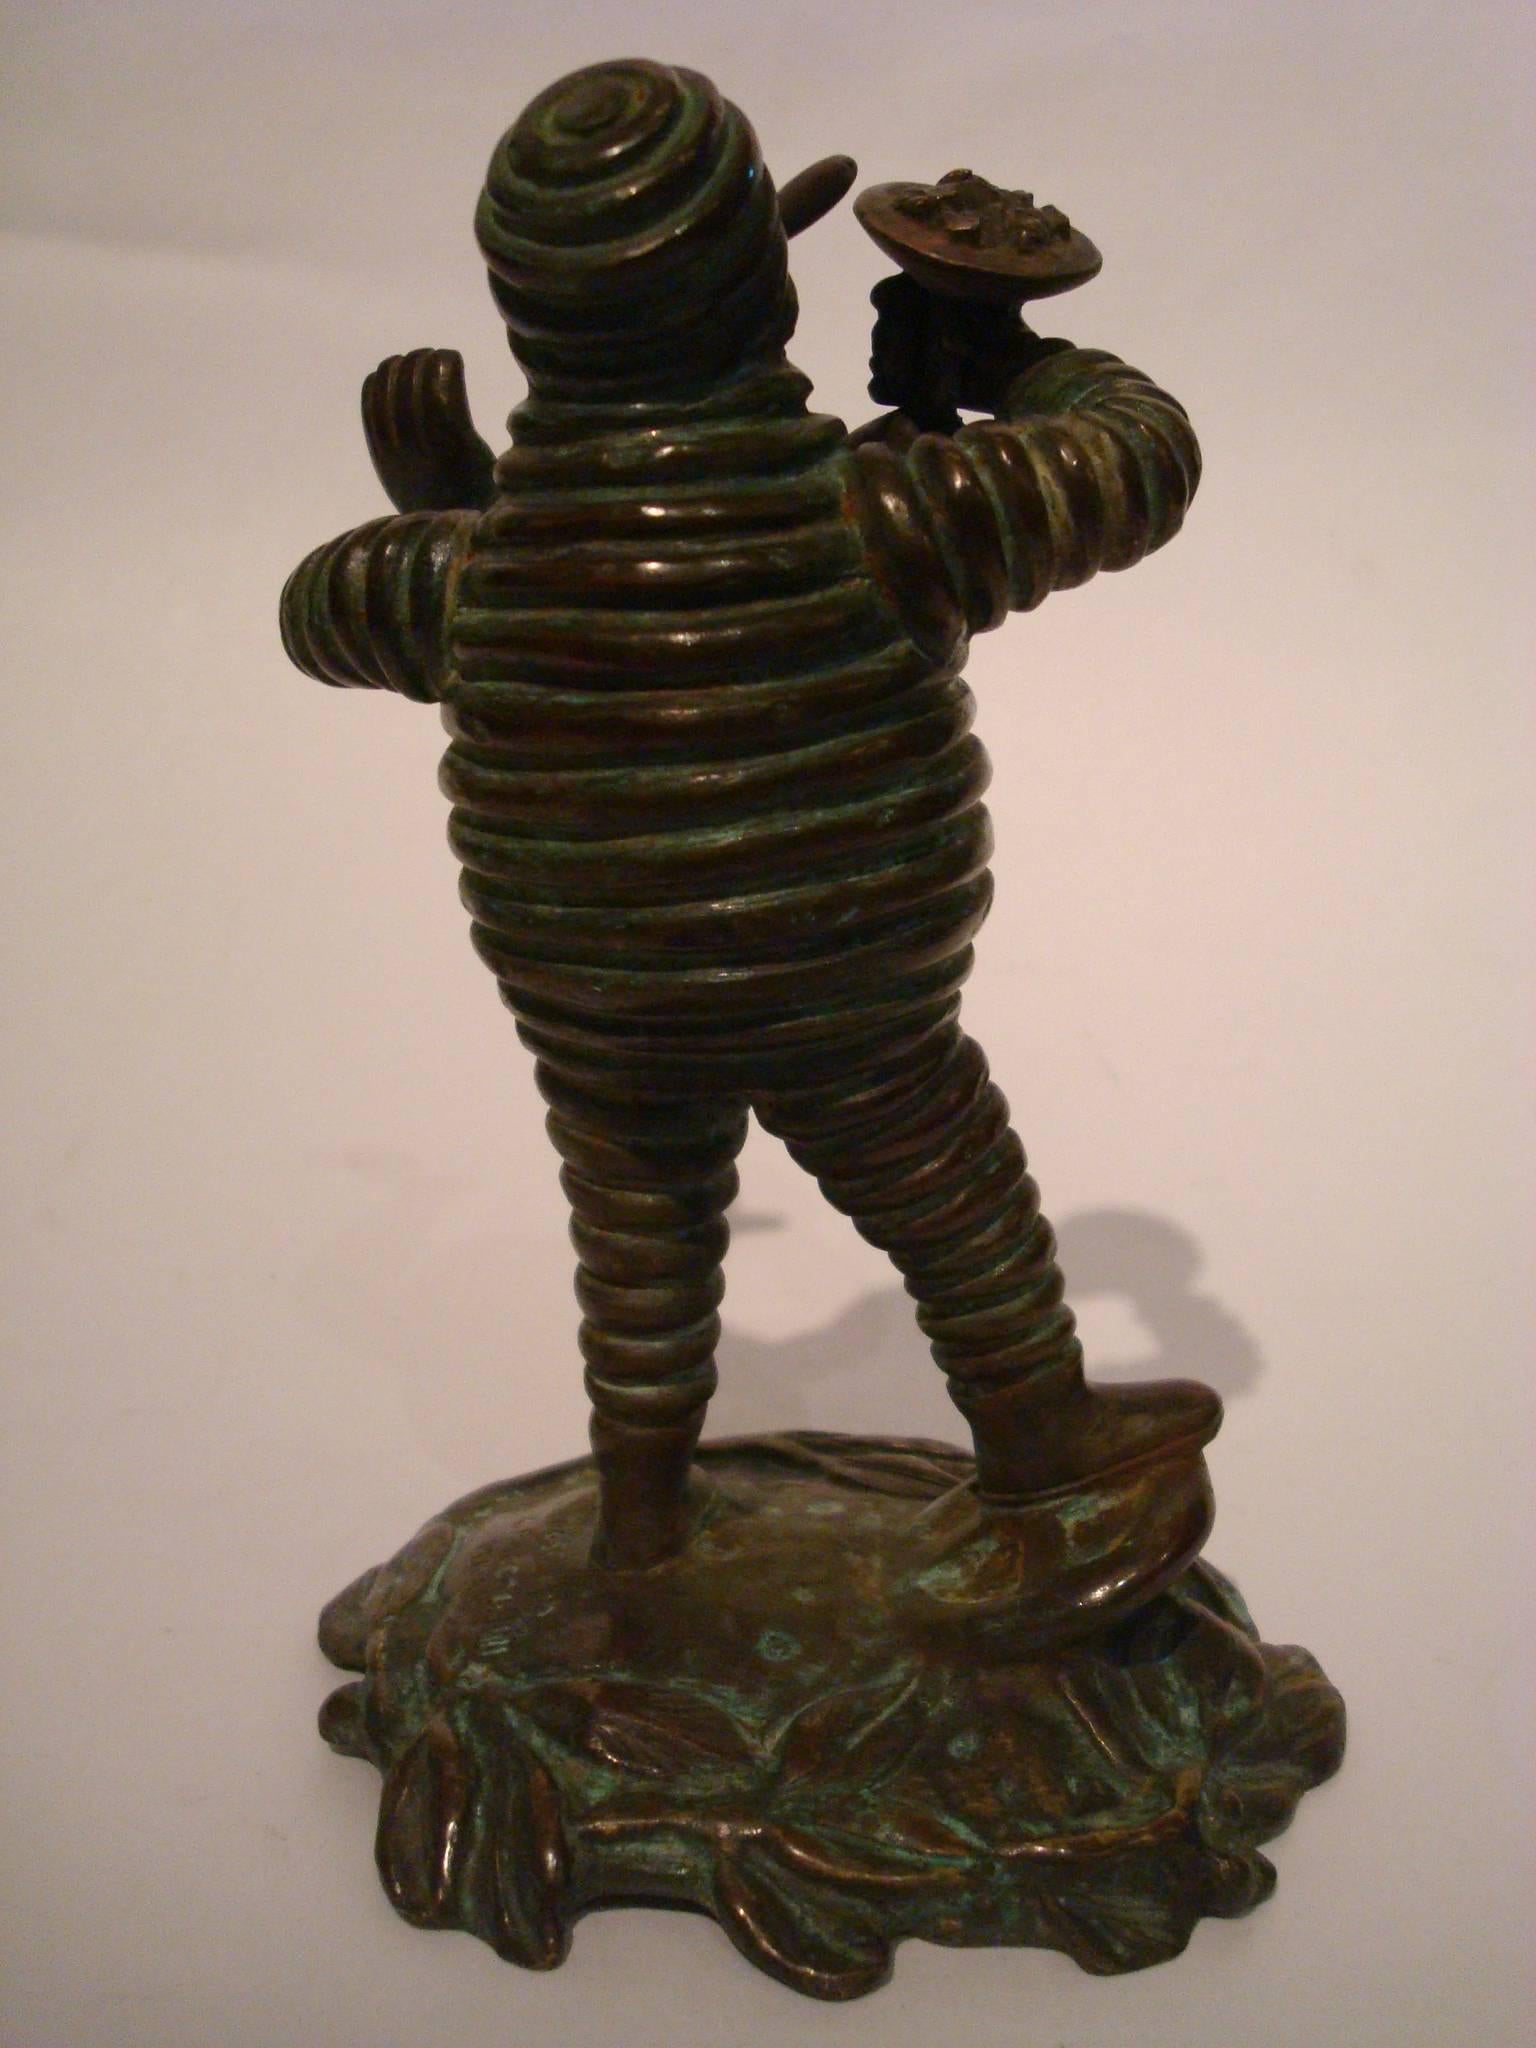 Fantastic Michelin Man ¨Bibendum¨ advertising Car Mascot, Hood Ornament. Excellent piece of automobilia. Original Patina. On the Book The Michelin Man by Rudy LeCoadic page 107, you can find pictures and information.
It says: Car Mascot signed C.